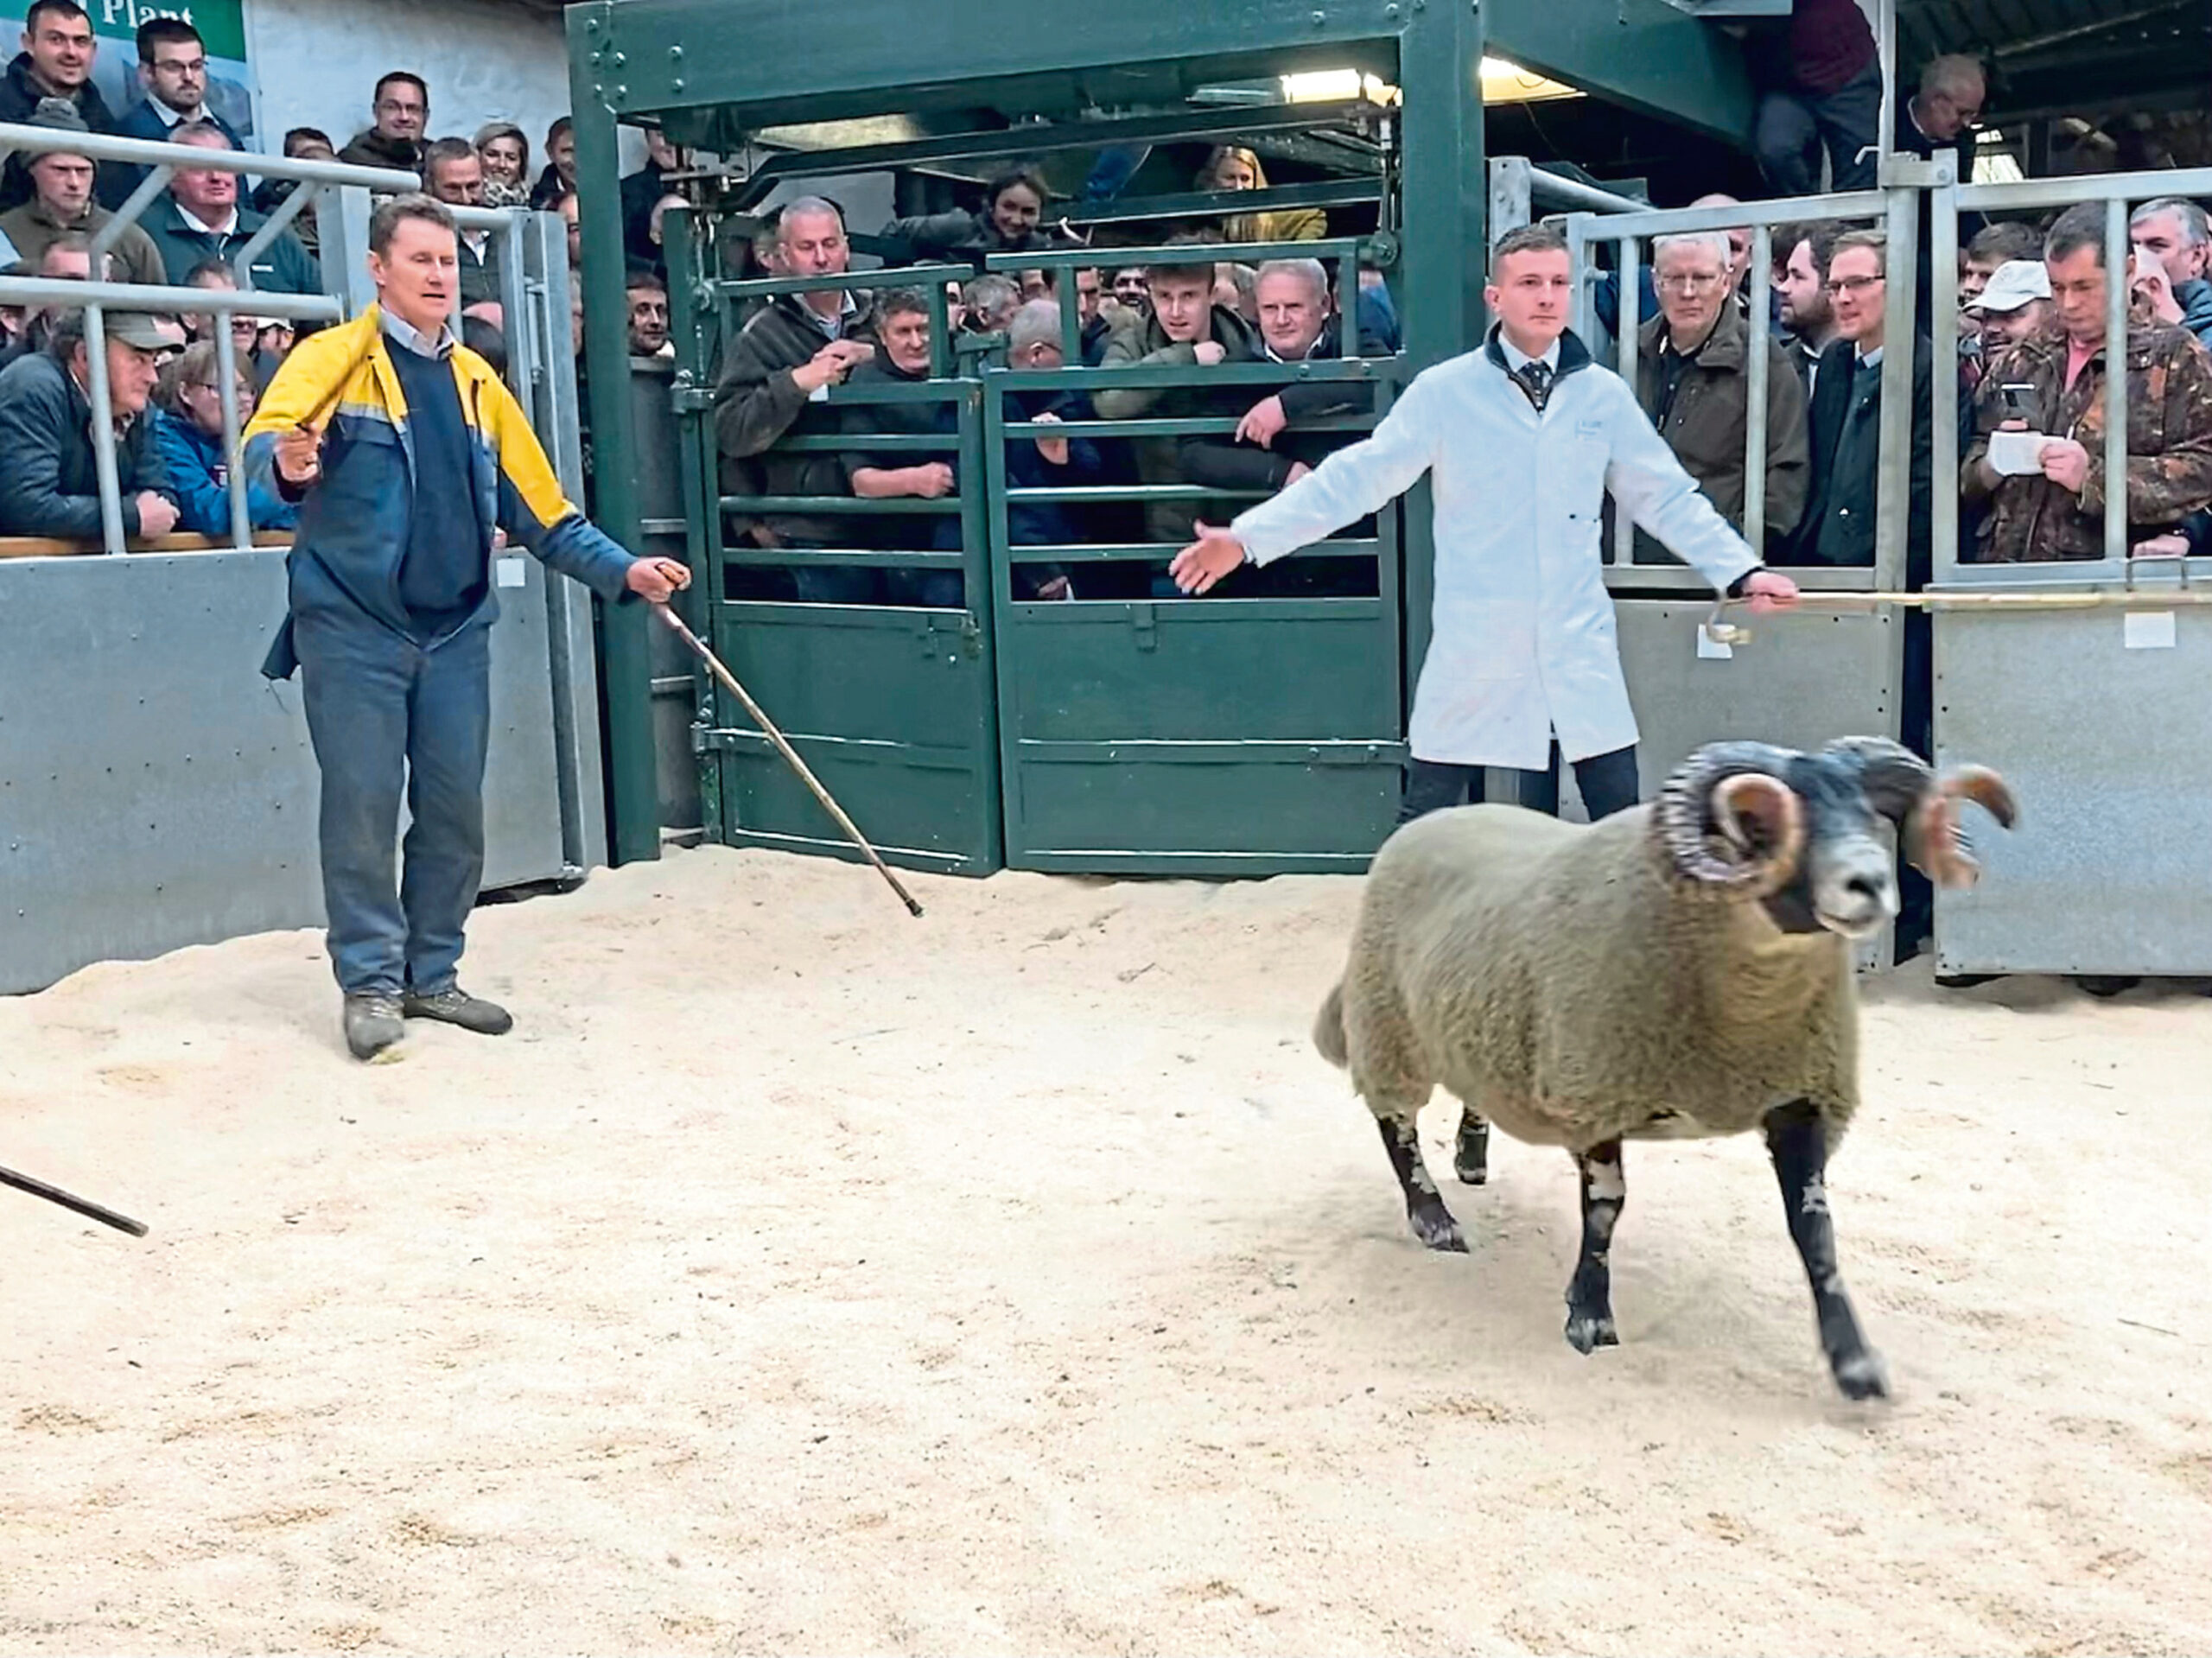 Crieff flock's ram sees top price of £78k at Dalmally Mart